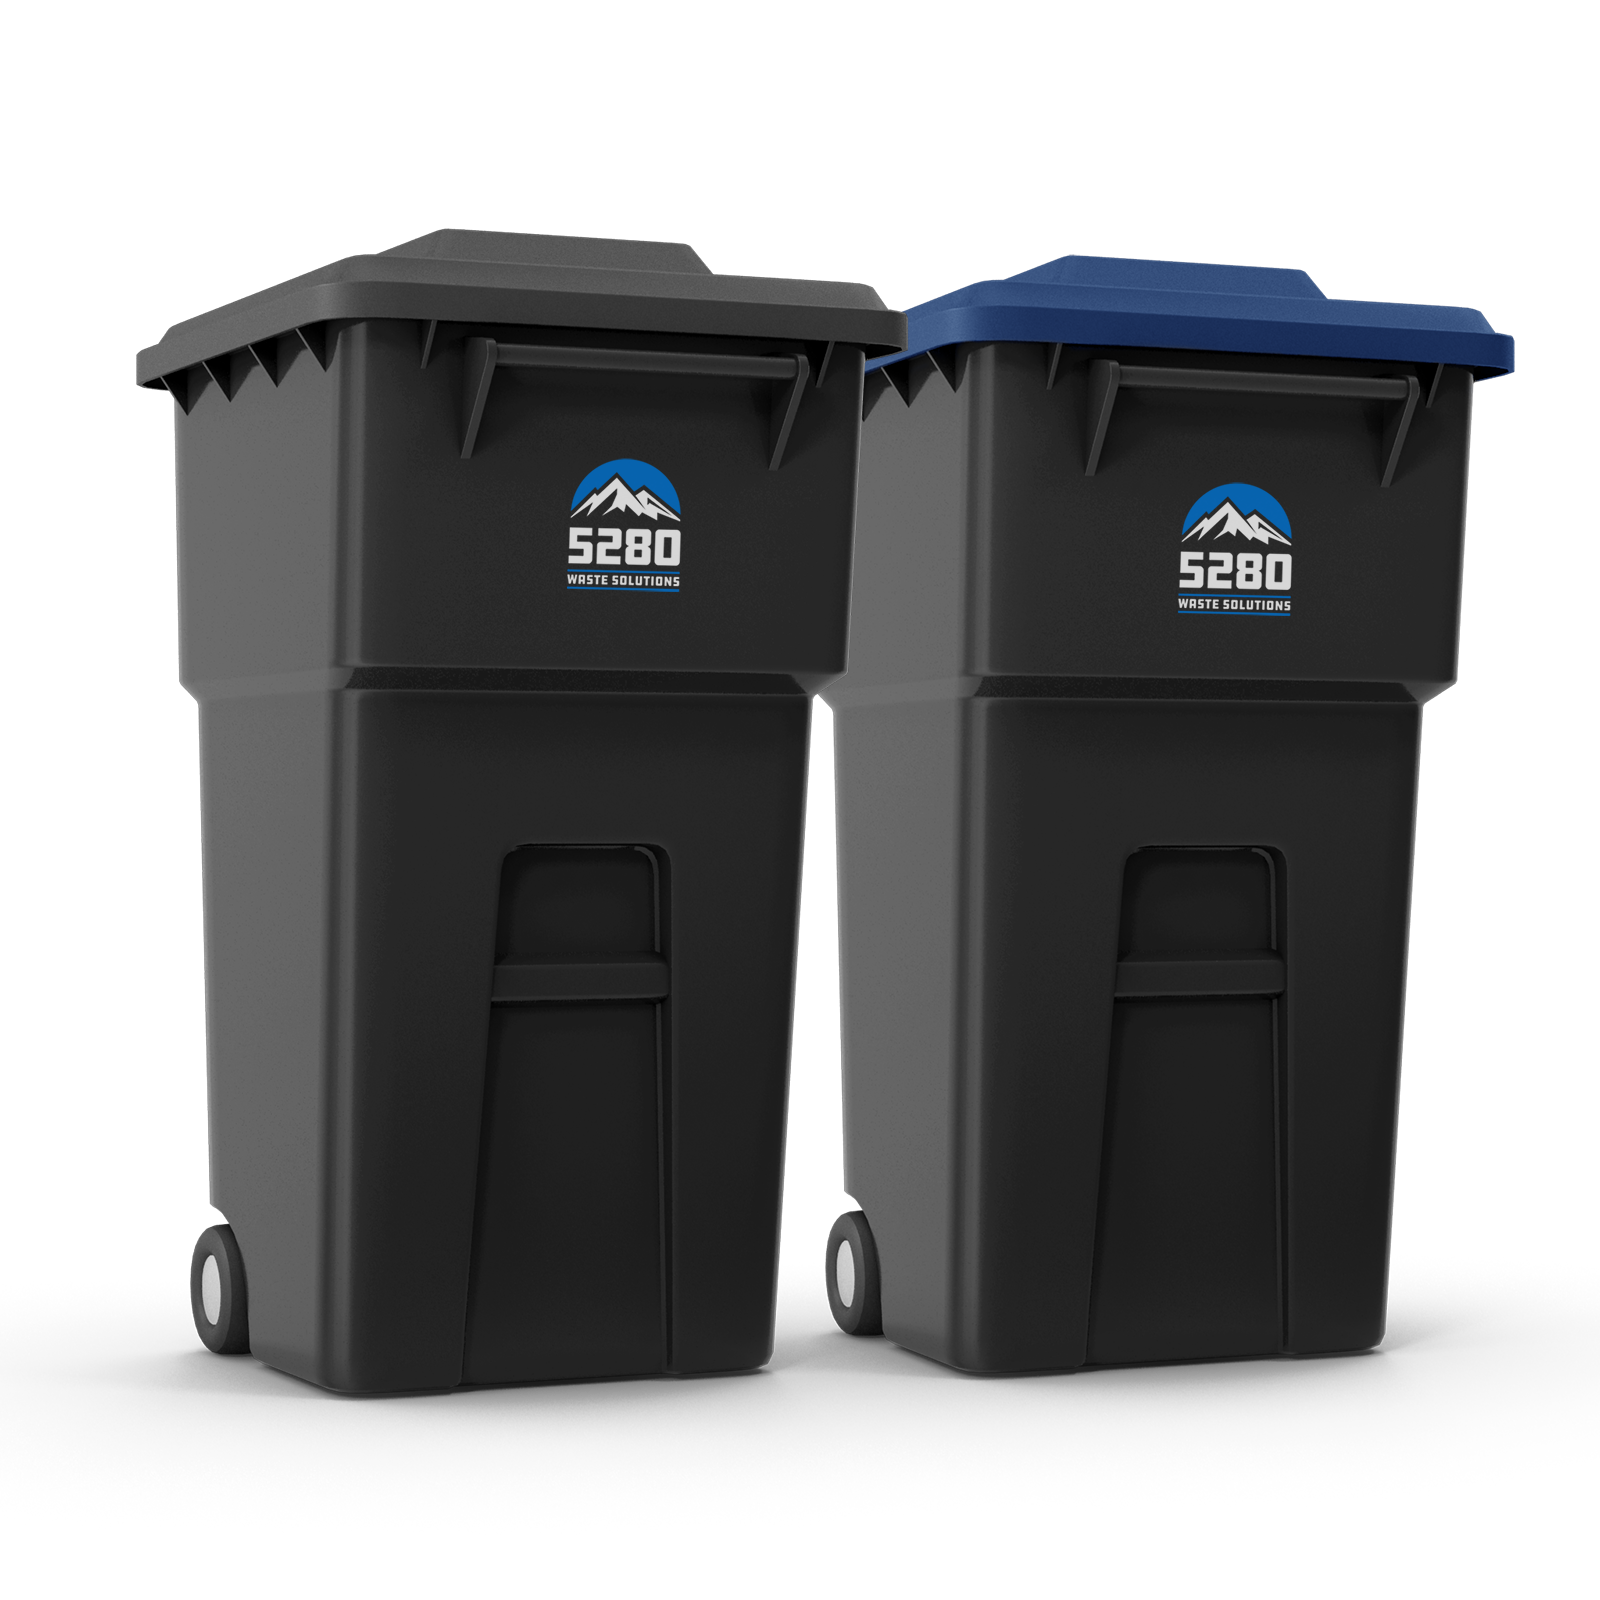 5280 Waste Solution Residential Trash Can